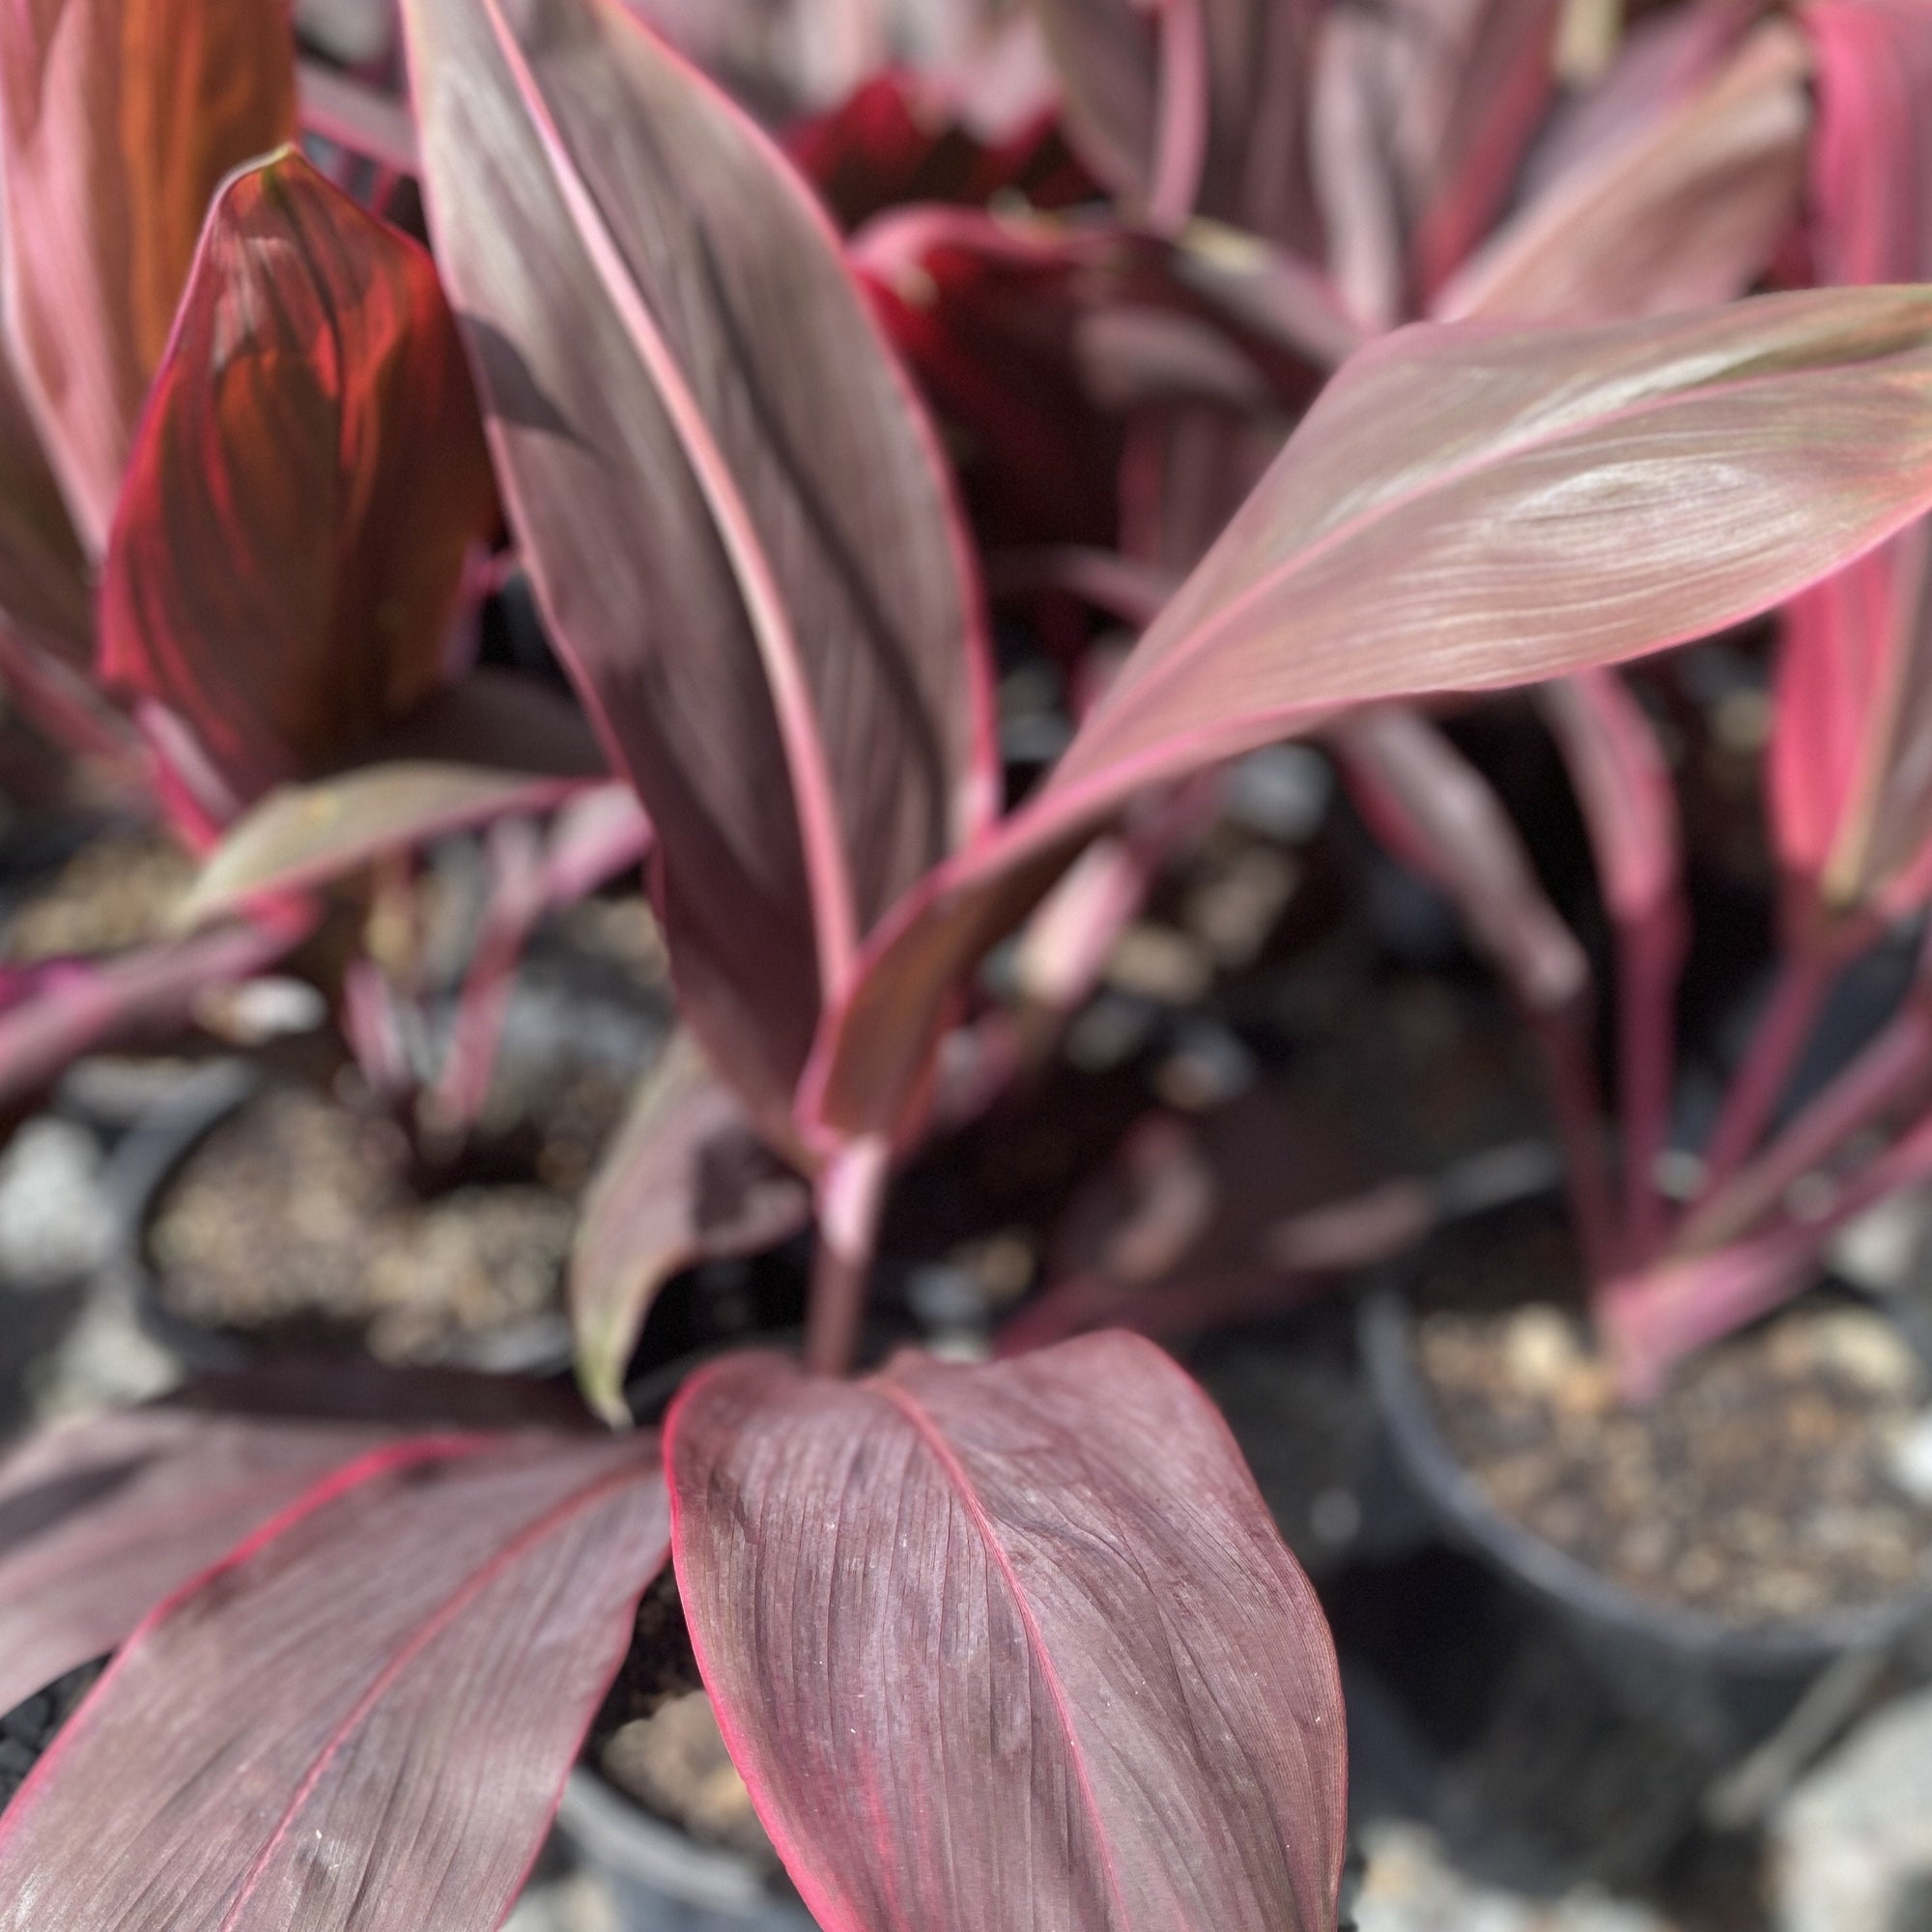 Cordyline 'Cherry Ripe' is a pretty plant with cherry-red leaves